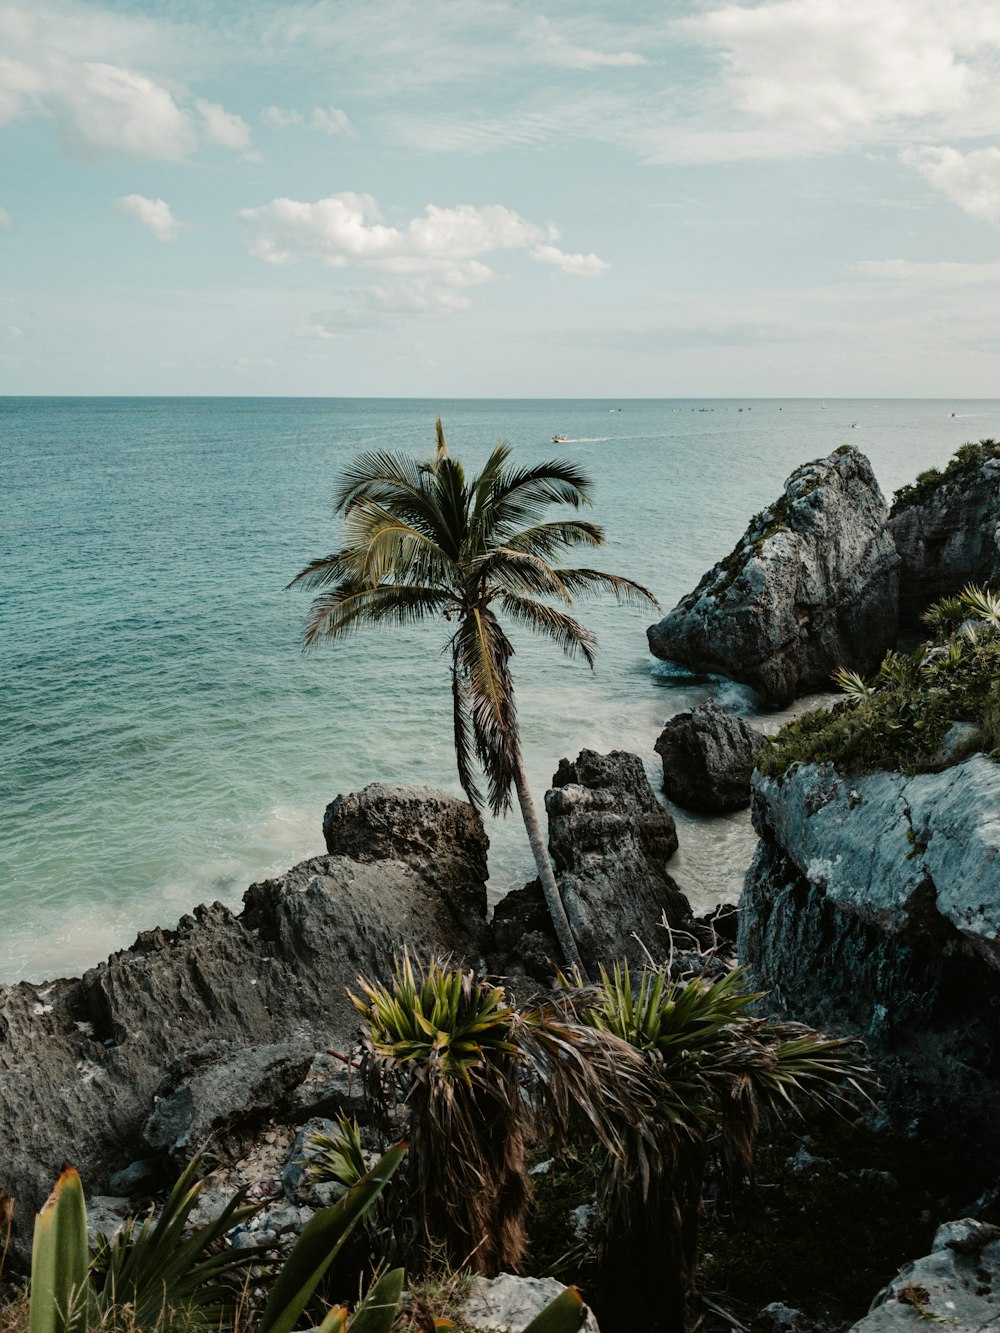 a palm tree on the edge of a cliff overlooking the ocean